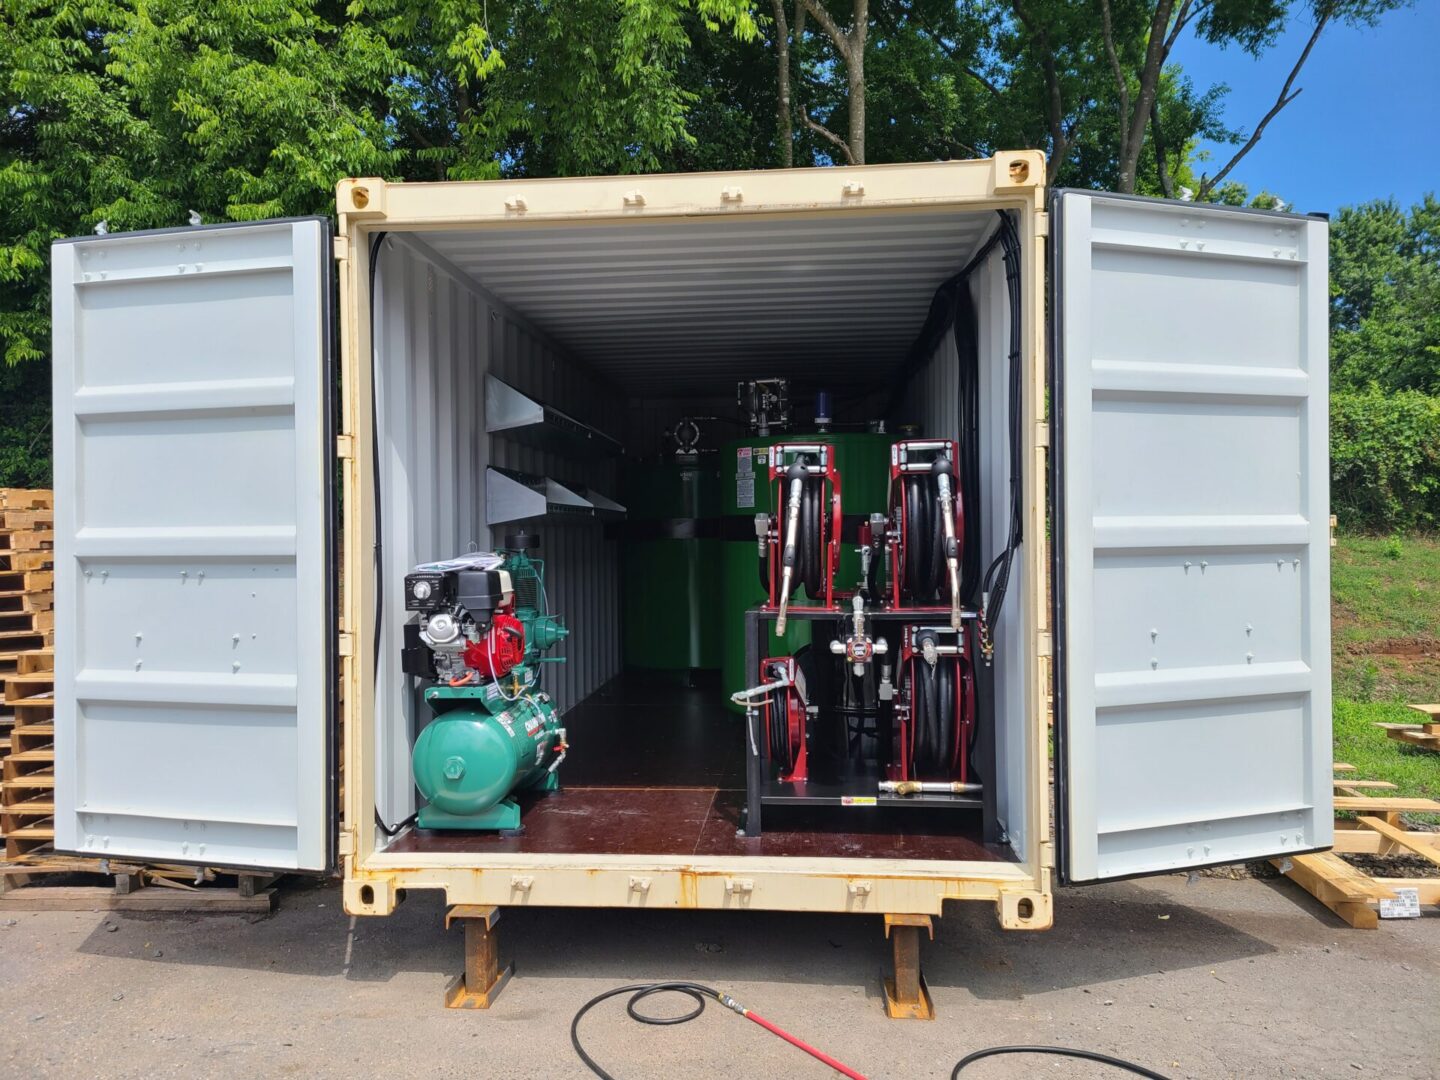 A container with many different types of equipment inside.